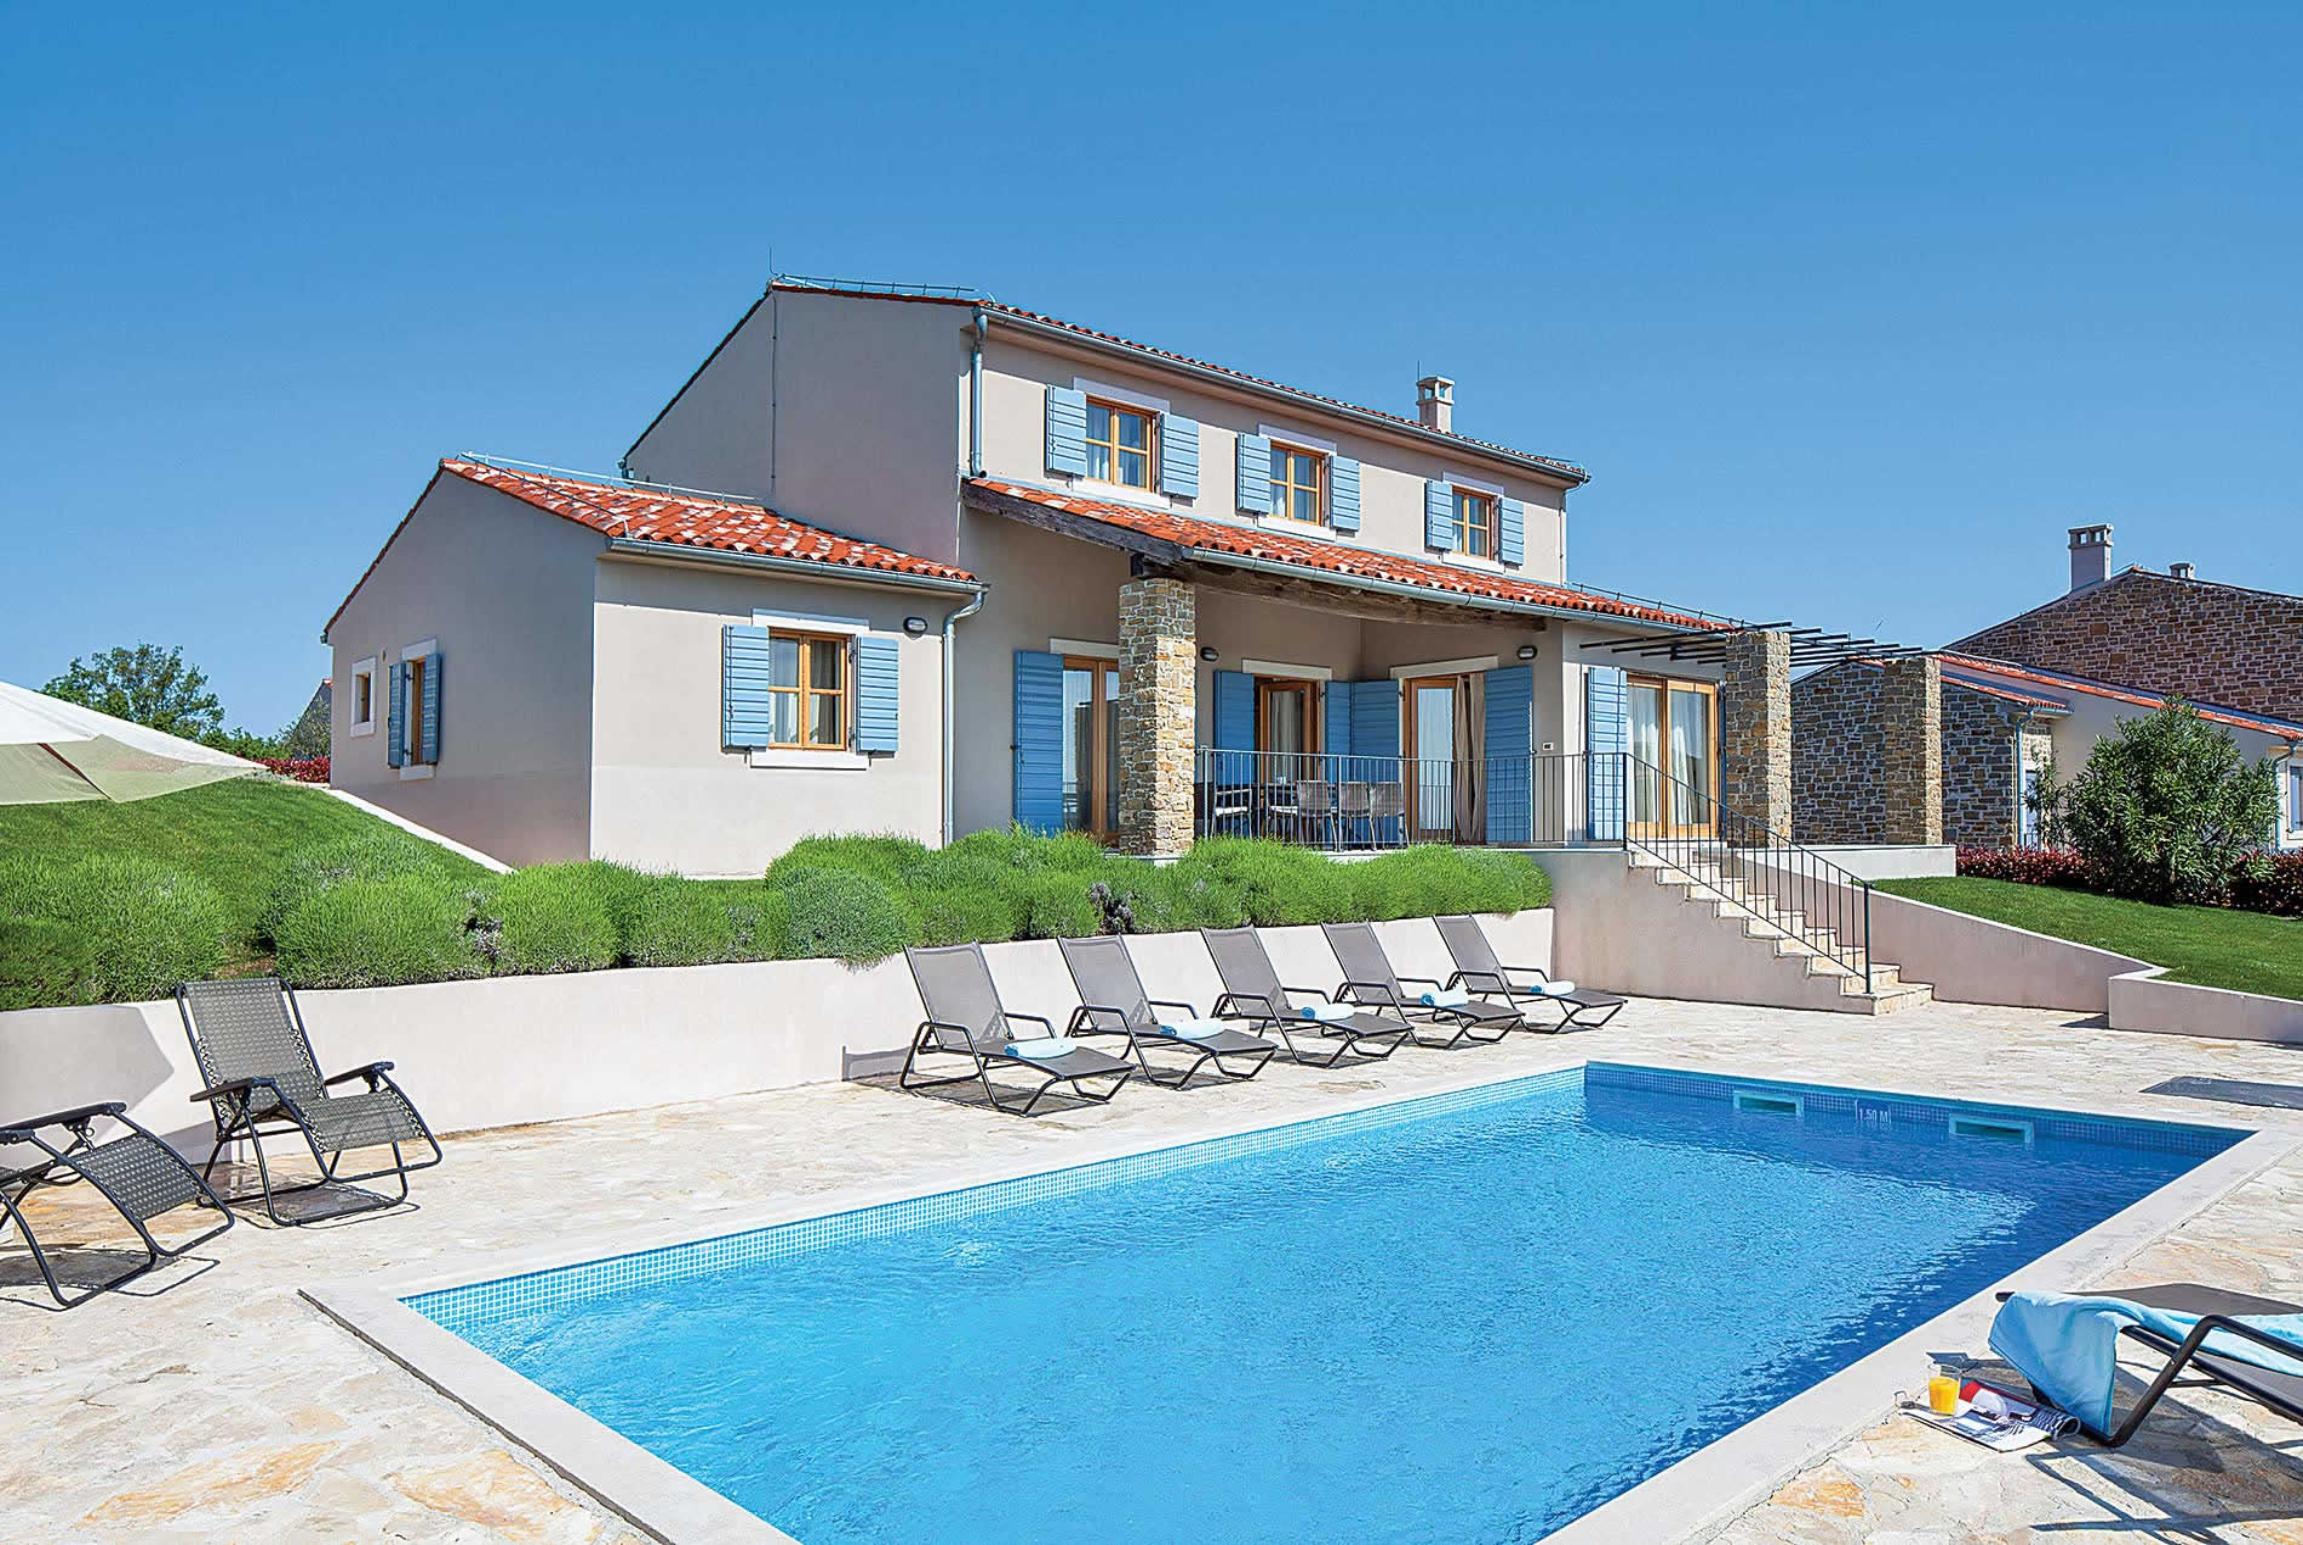 Property Image 1 - Villa with pool close to hilltop towns